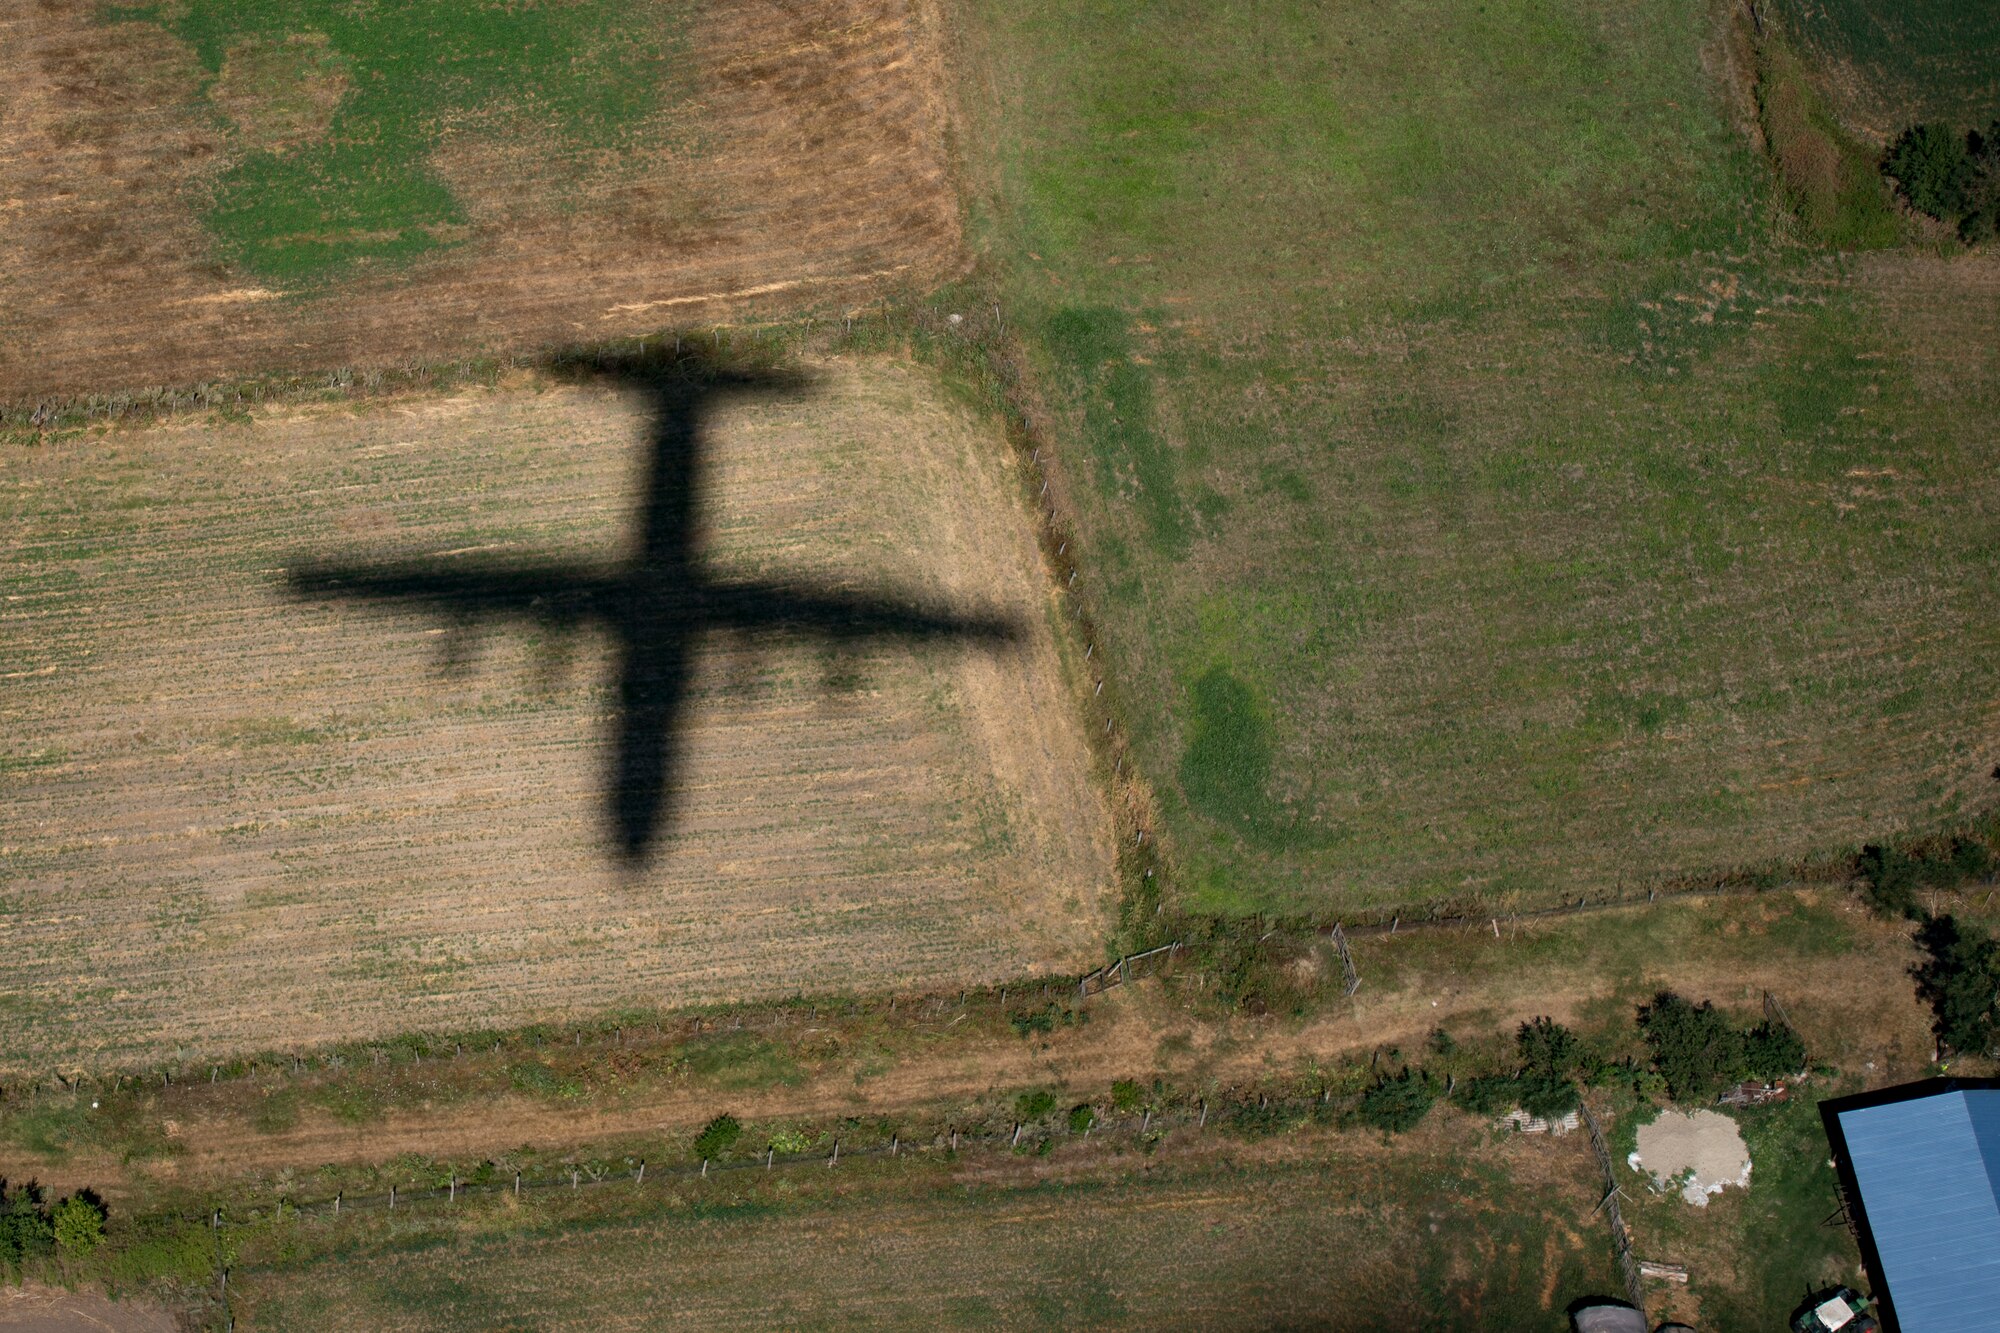 A U.S. Air Force C-130J Super Hercules aircraft assigned to the 37th Airlift Squadron, Ramstein Air Base, Germany, casts a shadow as it flies over farmland in Romania during exercise Carpathian Summer 2018, Aug. 21, 2018. The 37th AS Airmen simulated a cargo drop to practice for the following day’s actual airdrop. (U.S. Air Force photo by Senior Airman Devin Boyer)